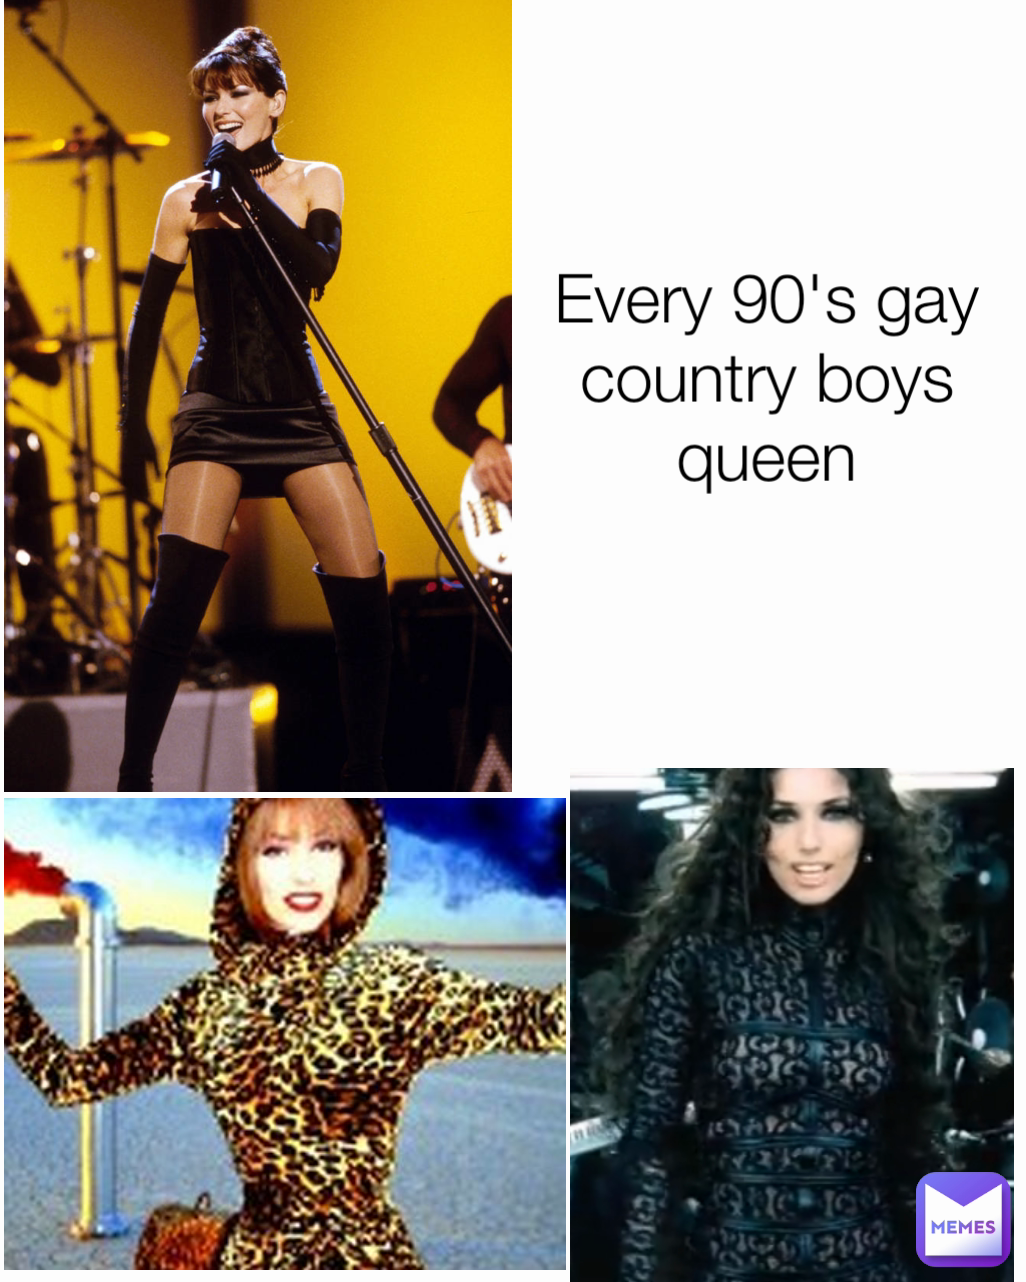 Every 90's gay country boys queen